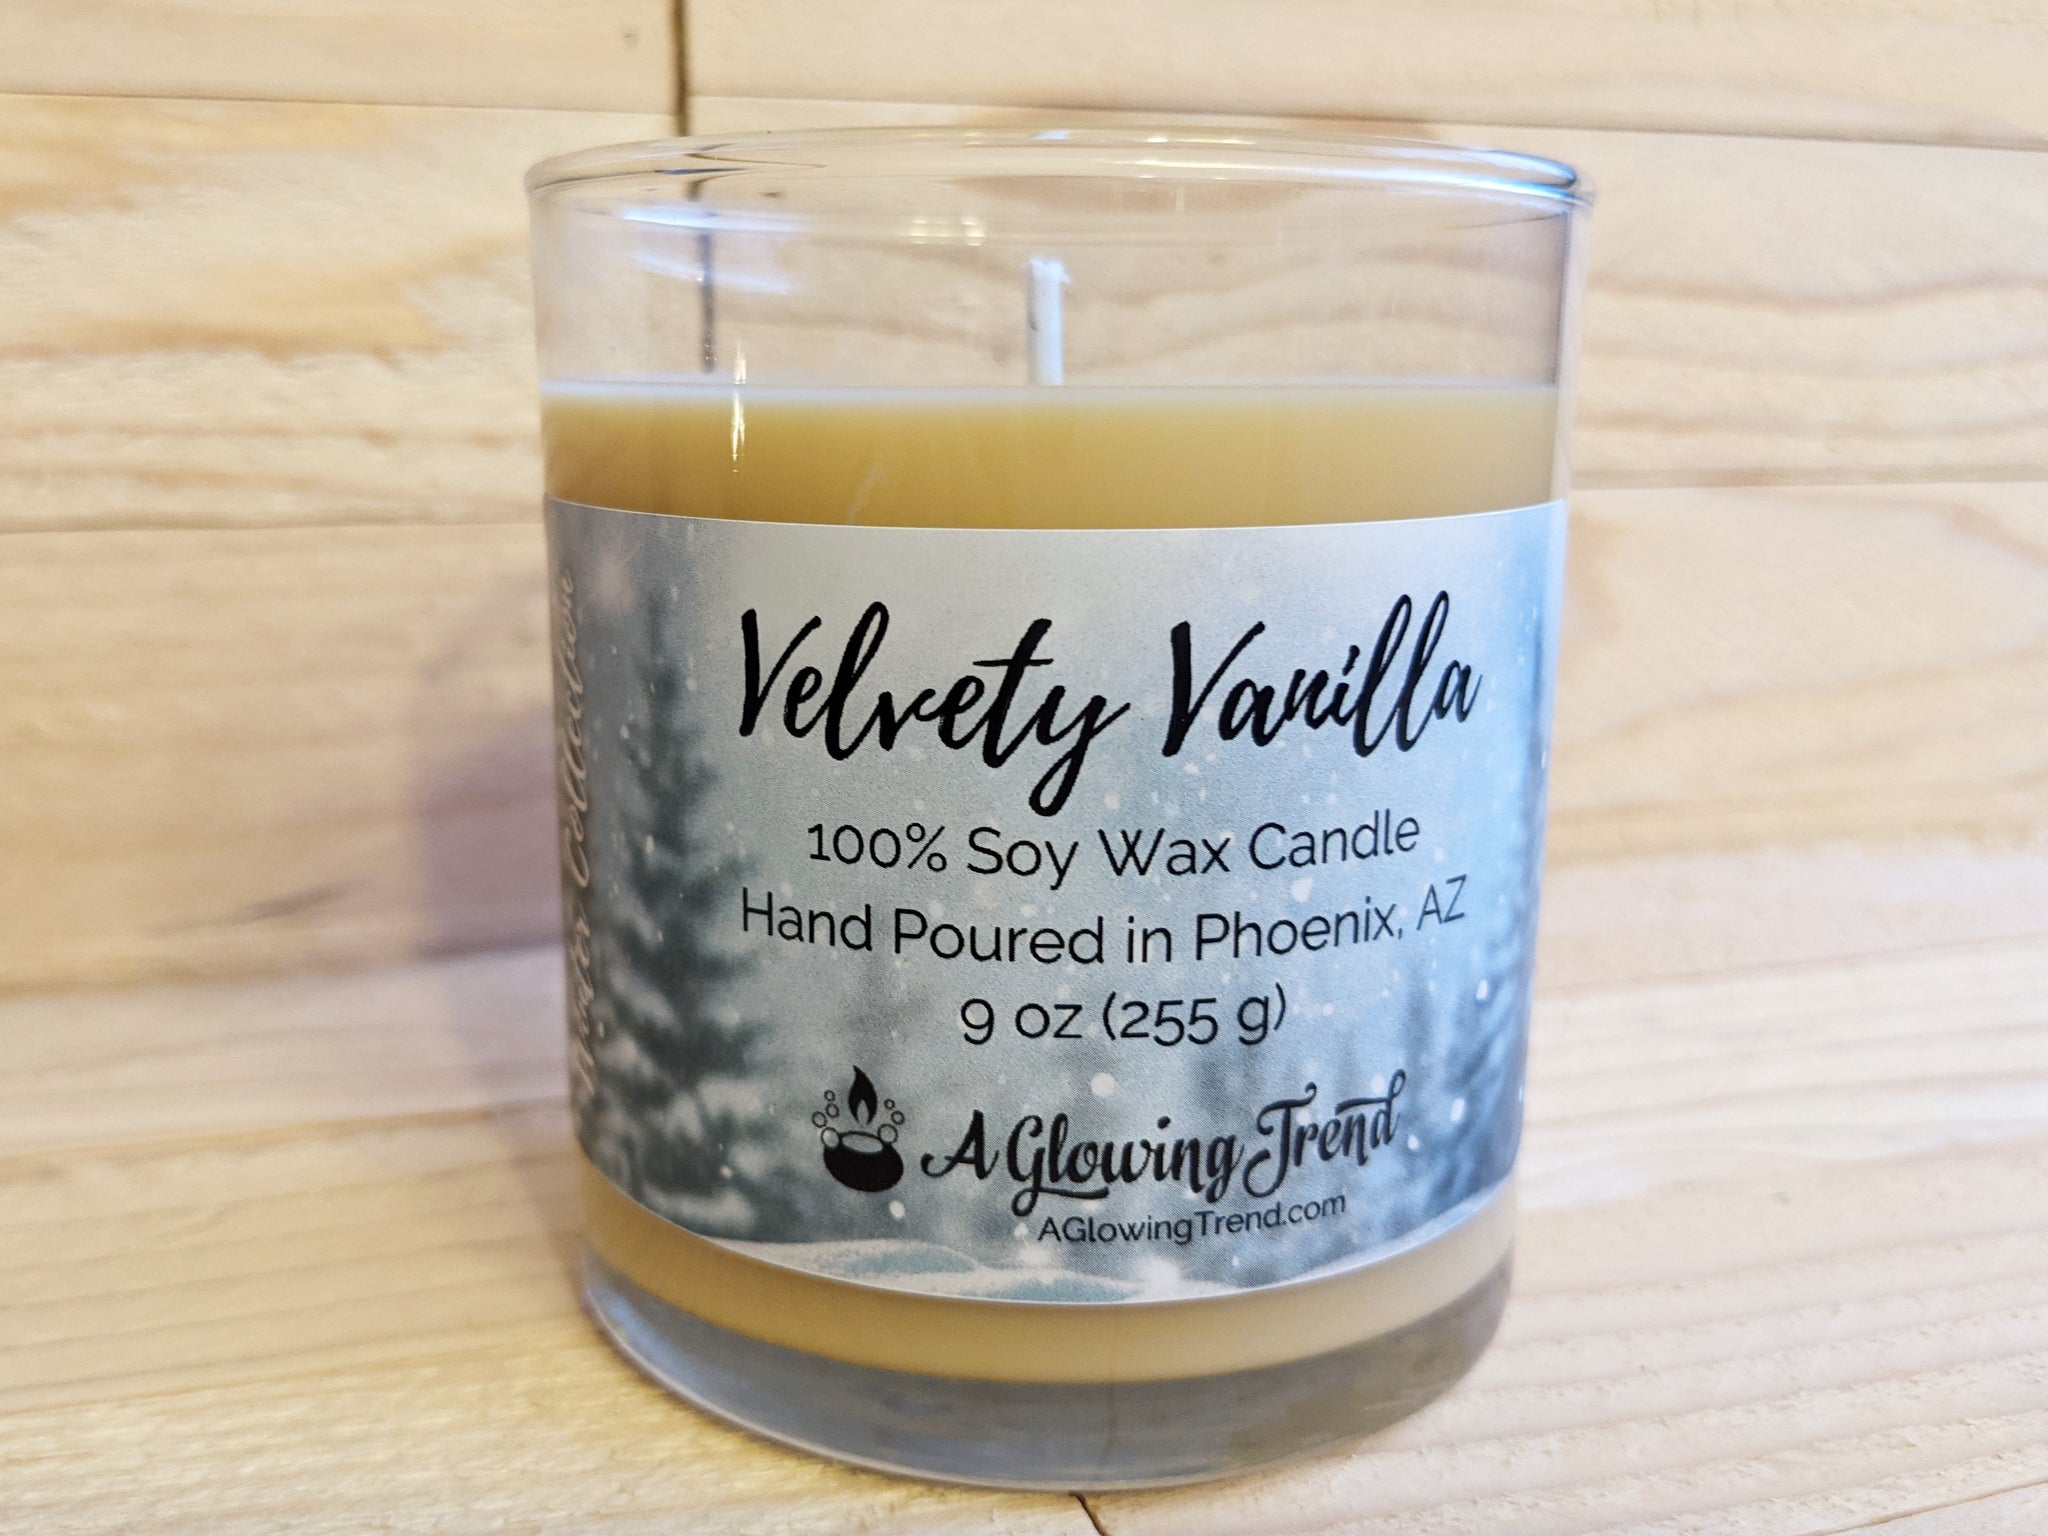 A 9 oz glass tumbler containing a light yellow Velvety Vanilla scented soy candle by A Glowing Trend